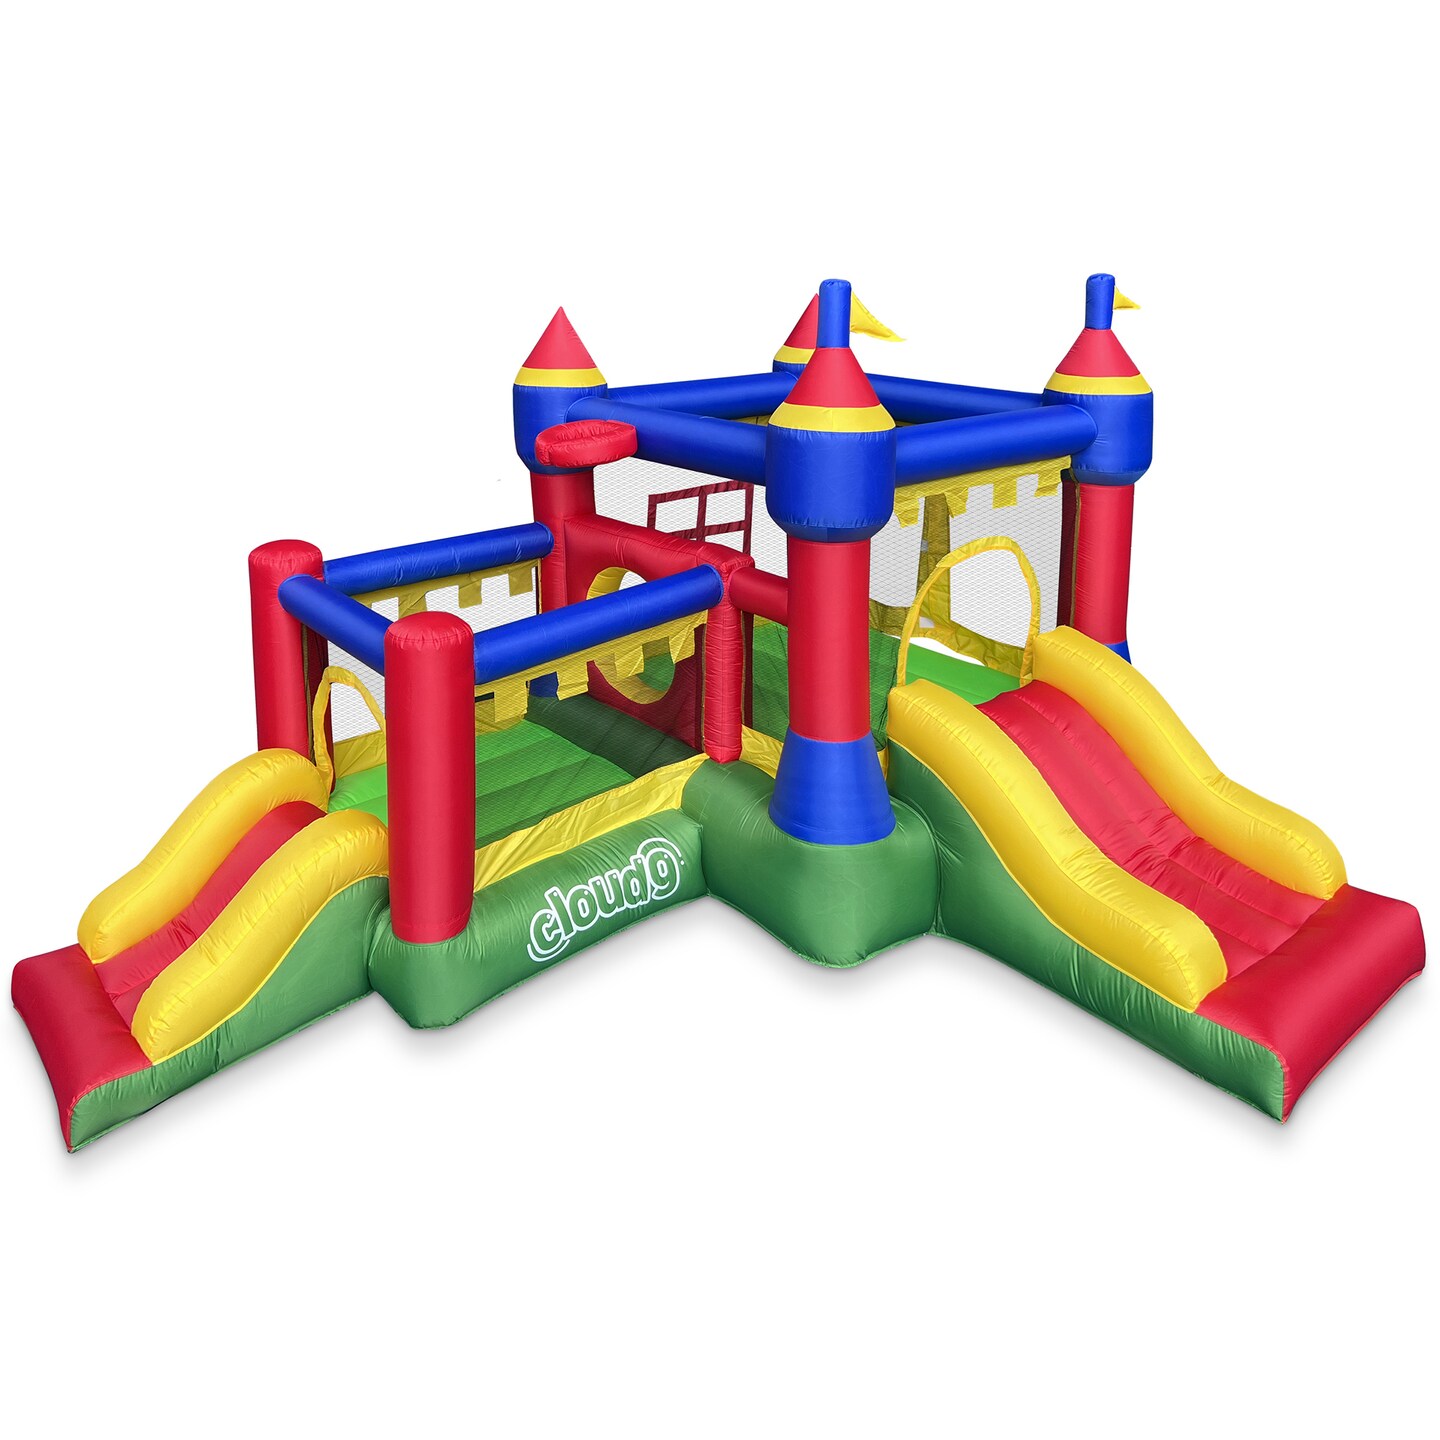 Cloud 9 Inflatable Castle Bounce House with Blower, Bouncer for Kids with Two Slides and Jumping Areas